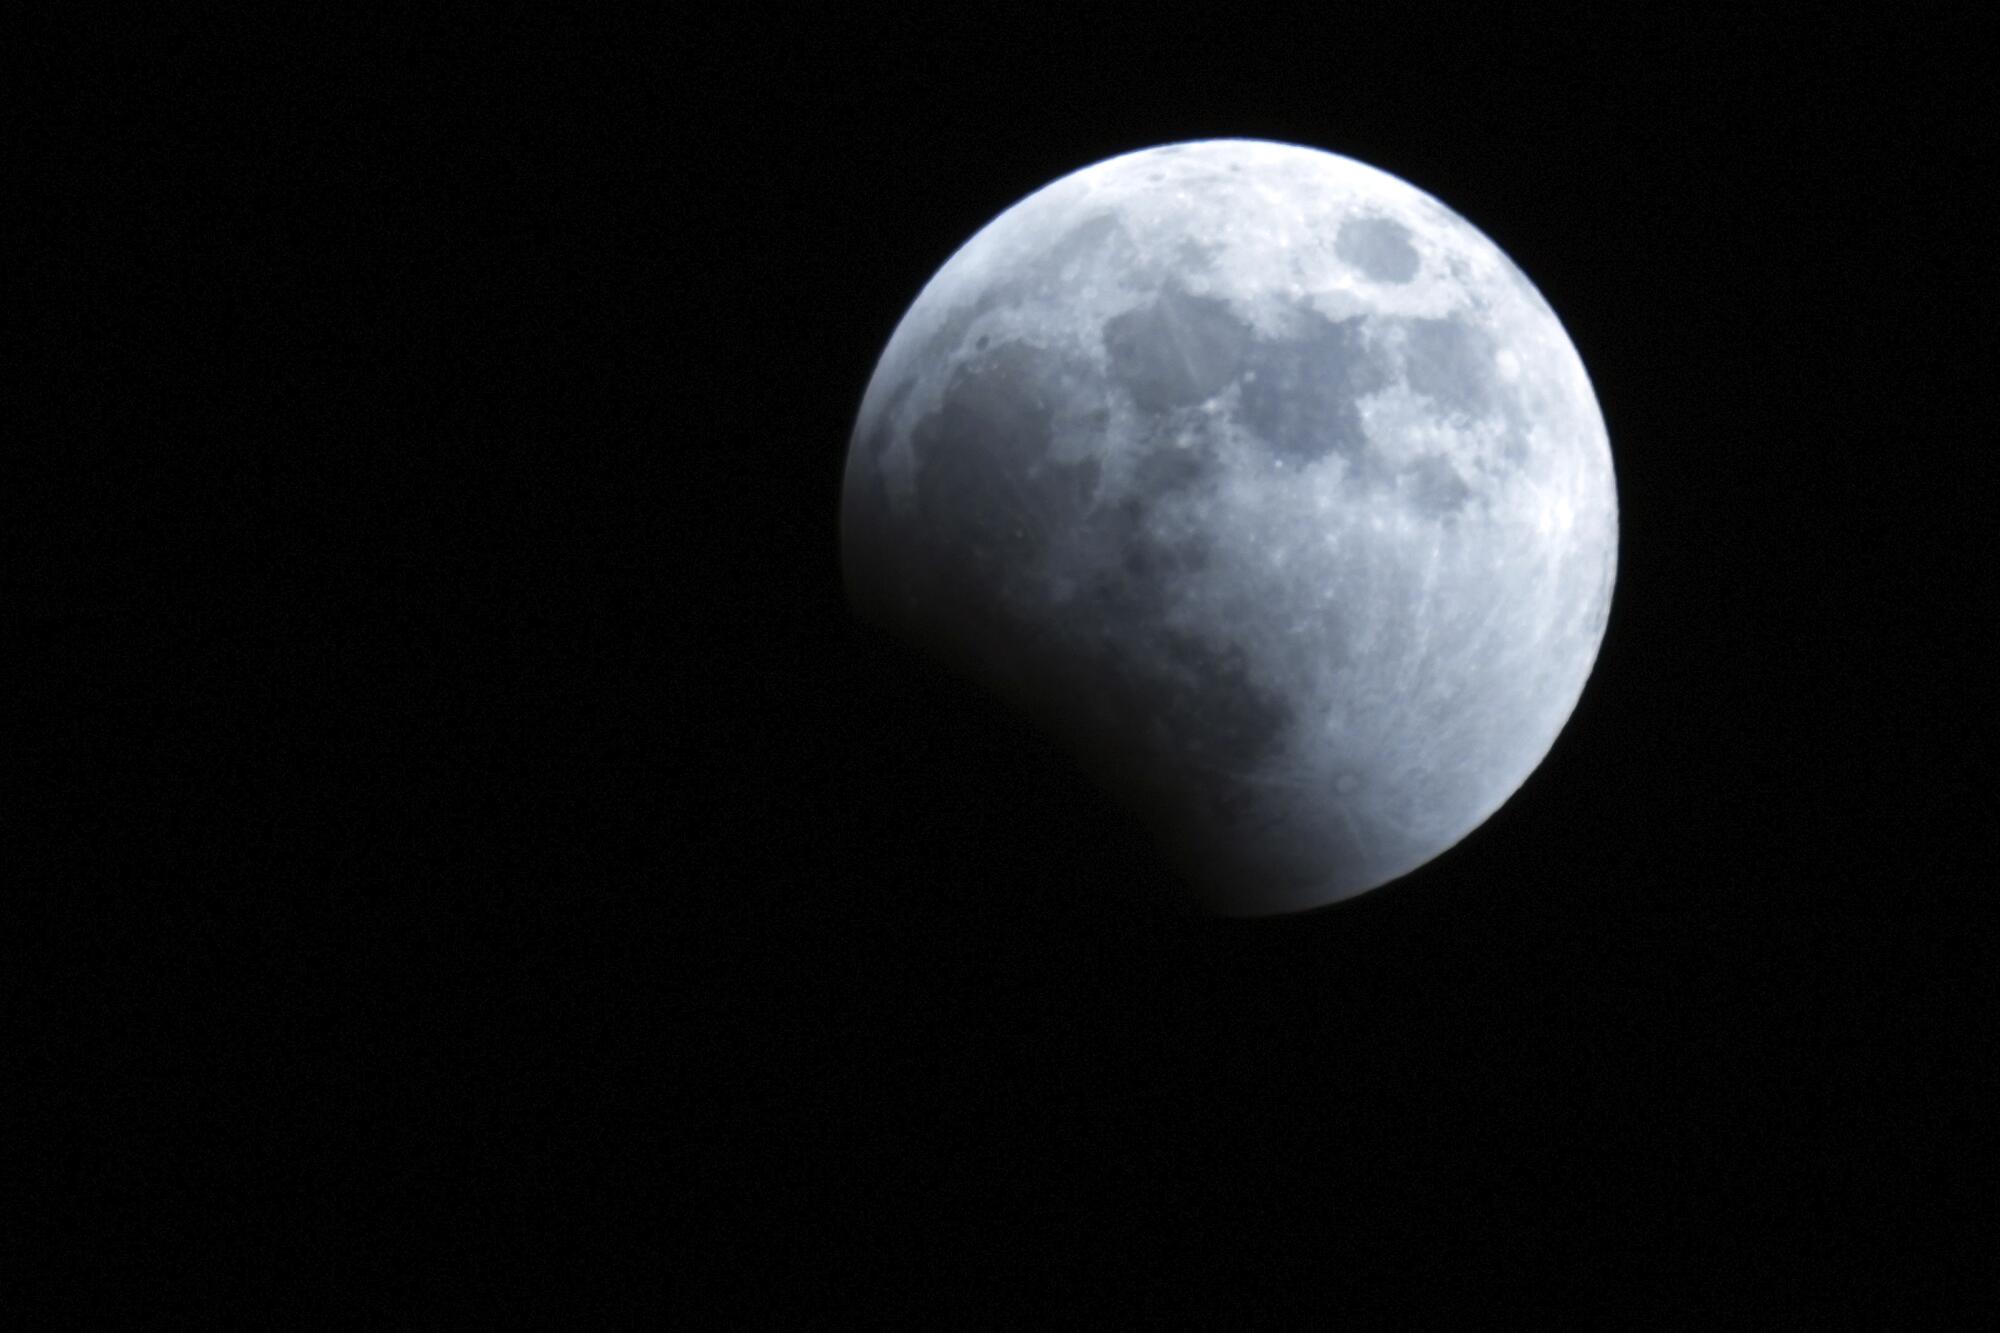 The Earth's shadow starts to cover the moon during a lunar eclipse in Yokohama near Tokyo.